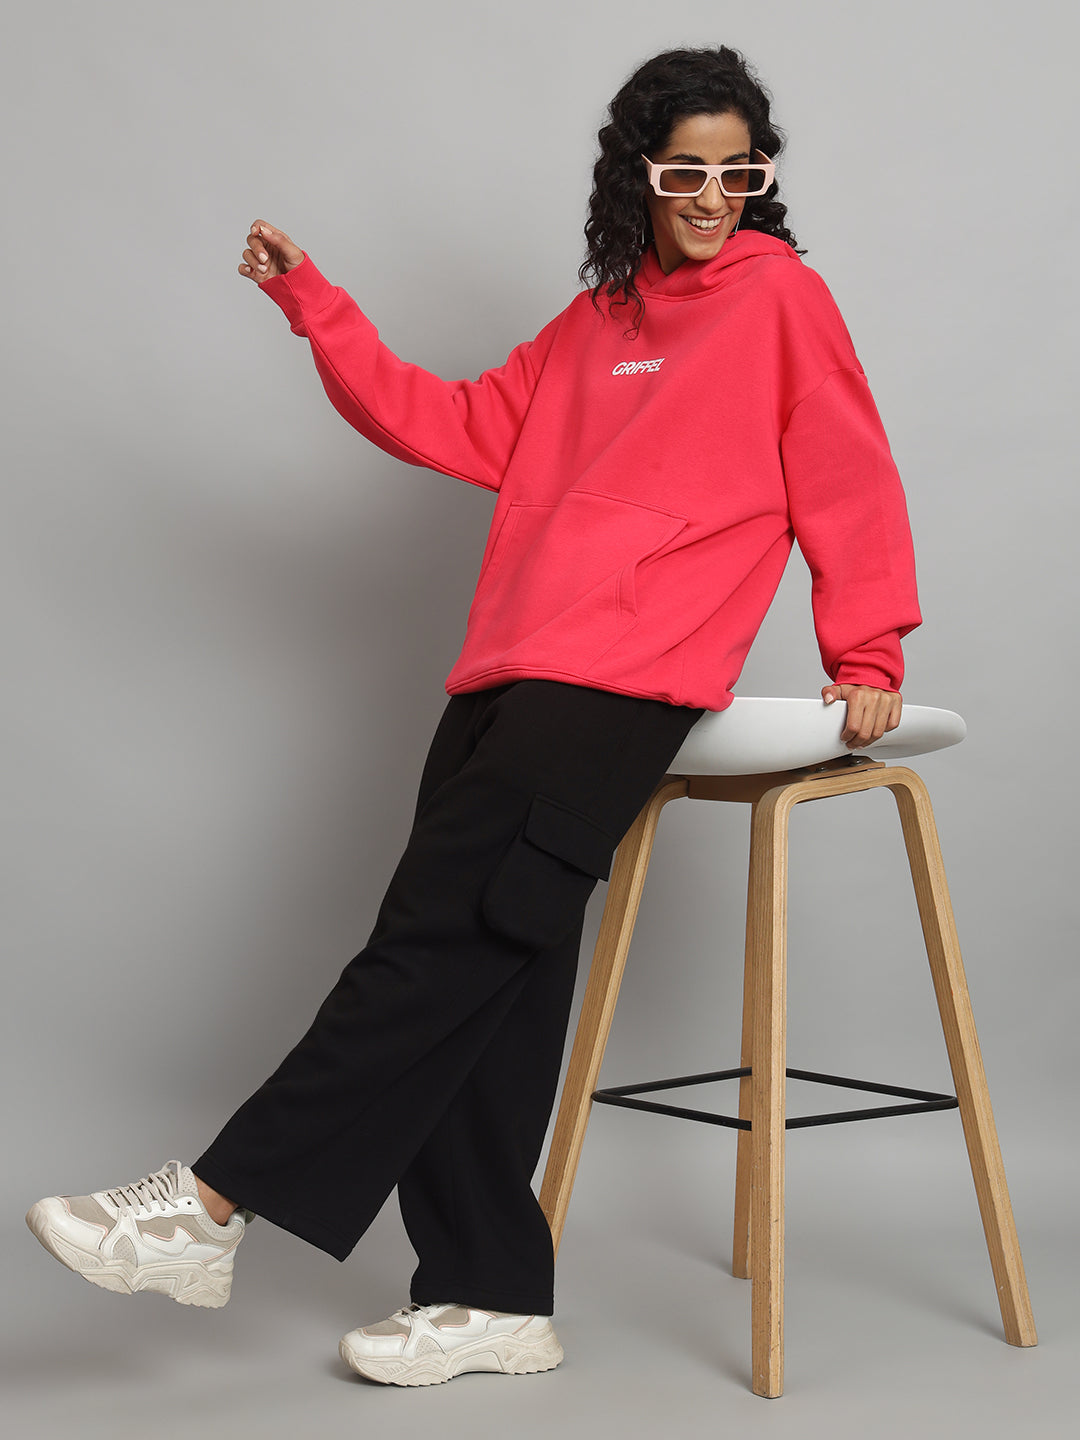 Griffel Women Oversized Fit Front Logo 100% Cotton Neon Pink Fleece Hoodie and trackpant - griffel